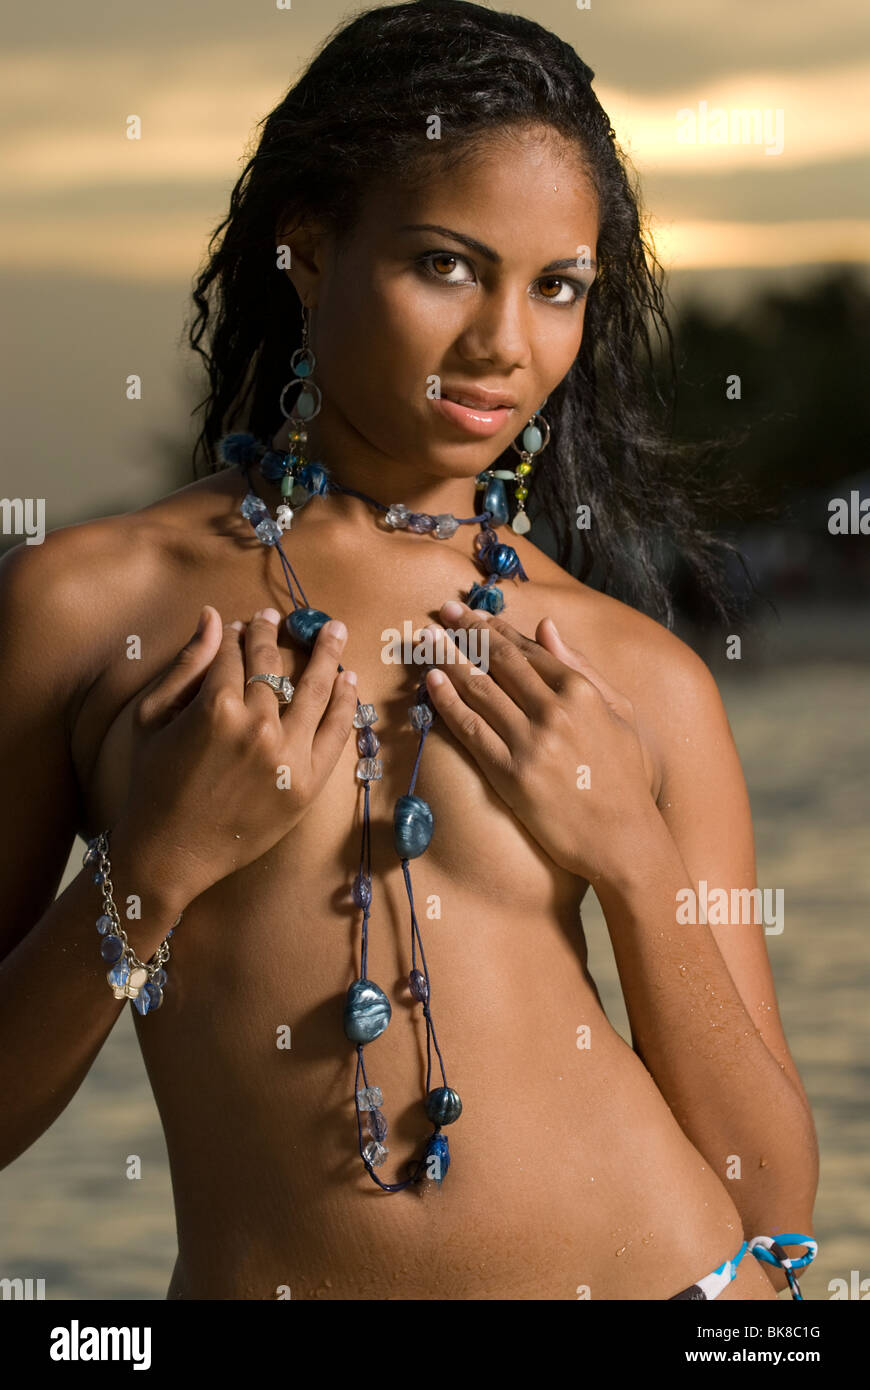 https://c8.alamy.com/comp/BK8C1G/beautiful-young-woman-poses-with-beads-and-hands-covering-breasts-BK8C1G.jpg